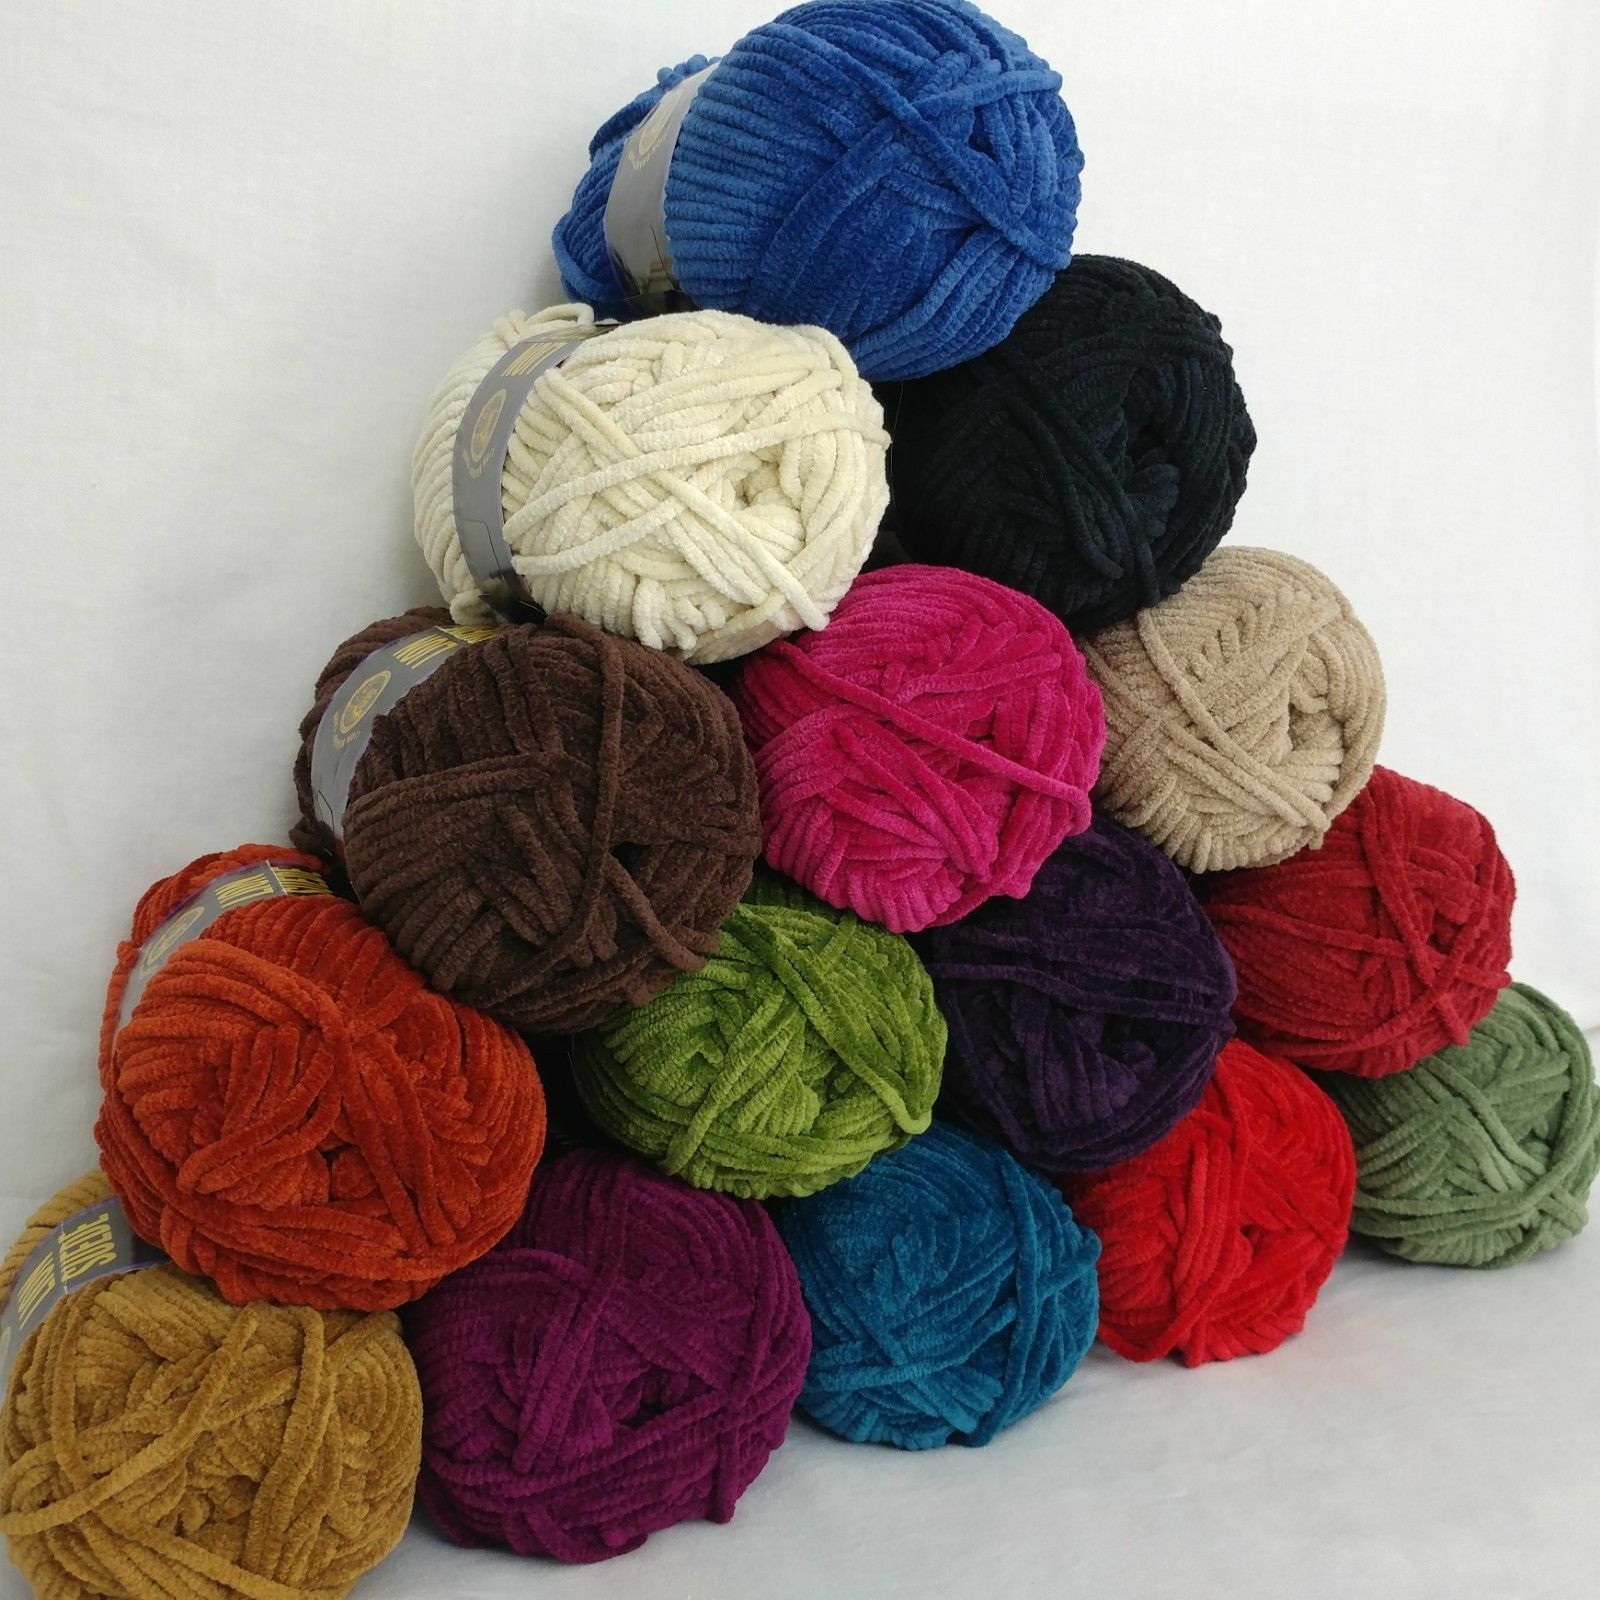 Lion Brand Suede Yarn 20 Colors Prints Bulky and 50 similar items